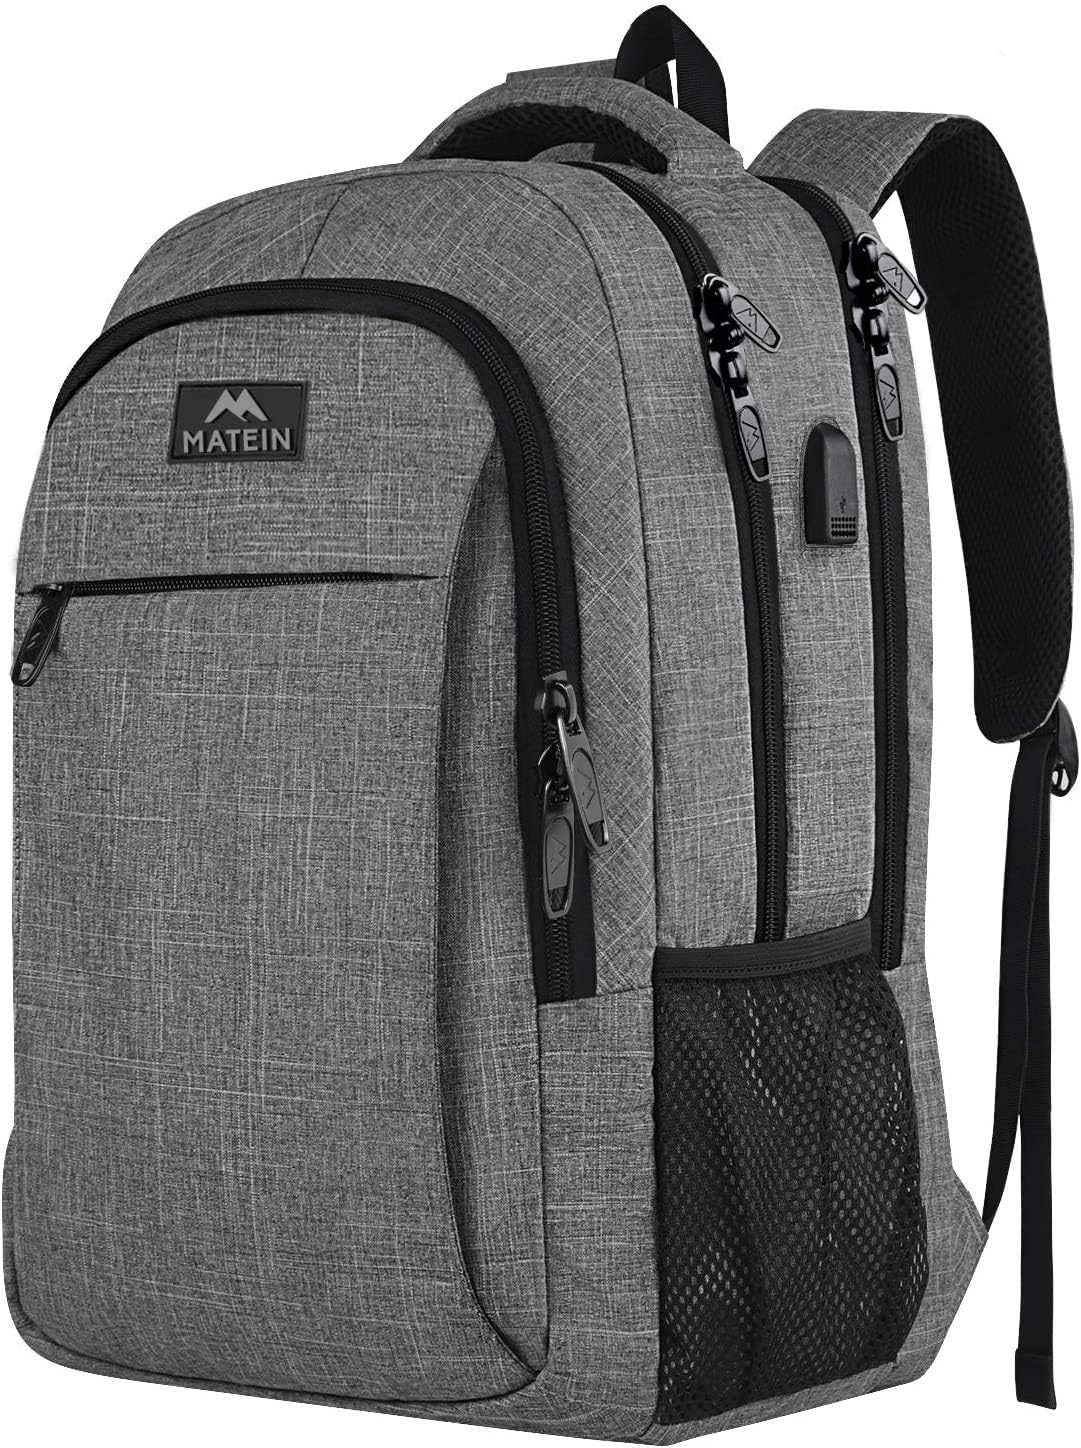 matein travel laptop backpack reviews